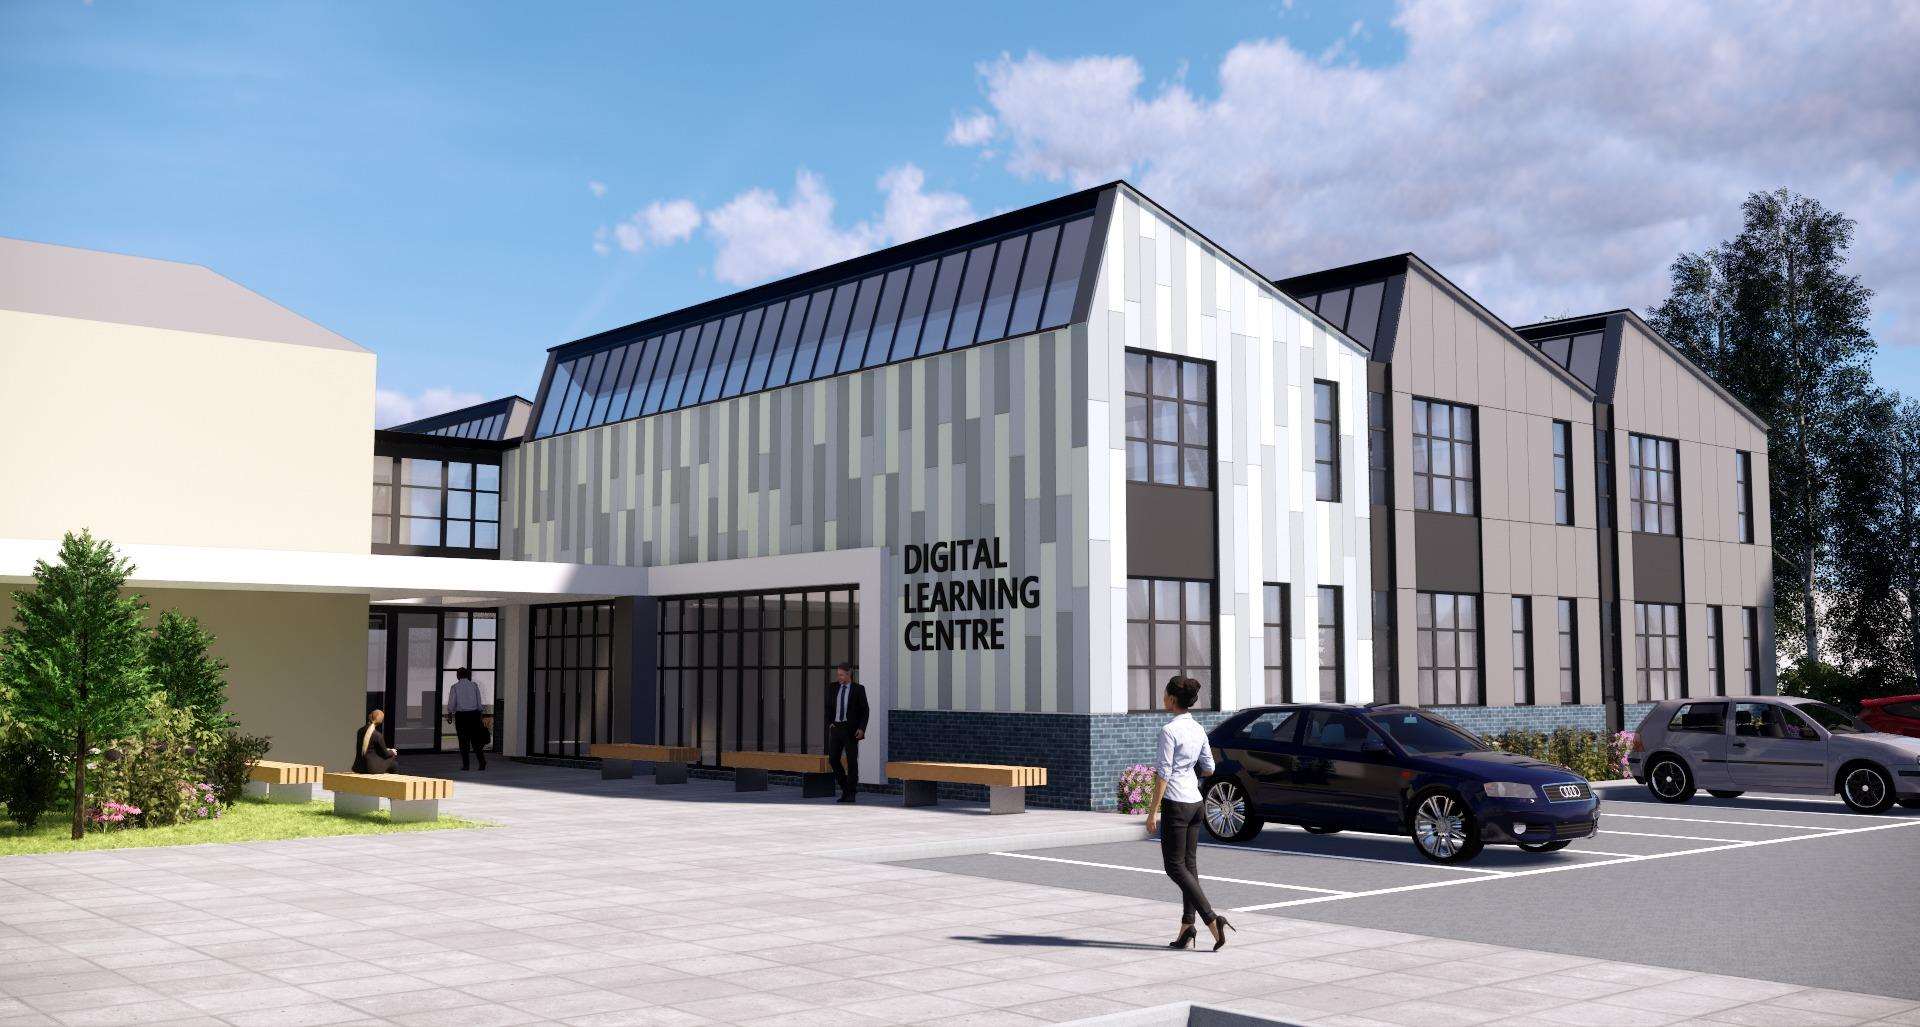 Funding for the upcoming £2 million Digital Learning Centre, which Ms Staab has championed, has already been secured